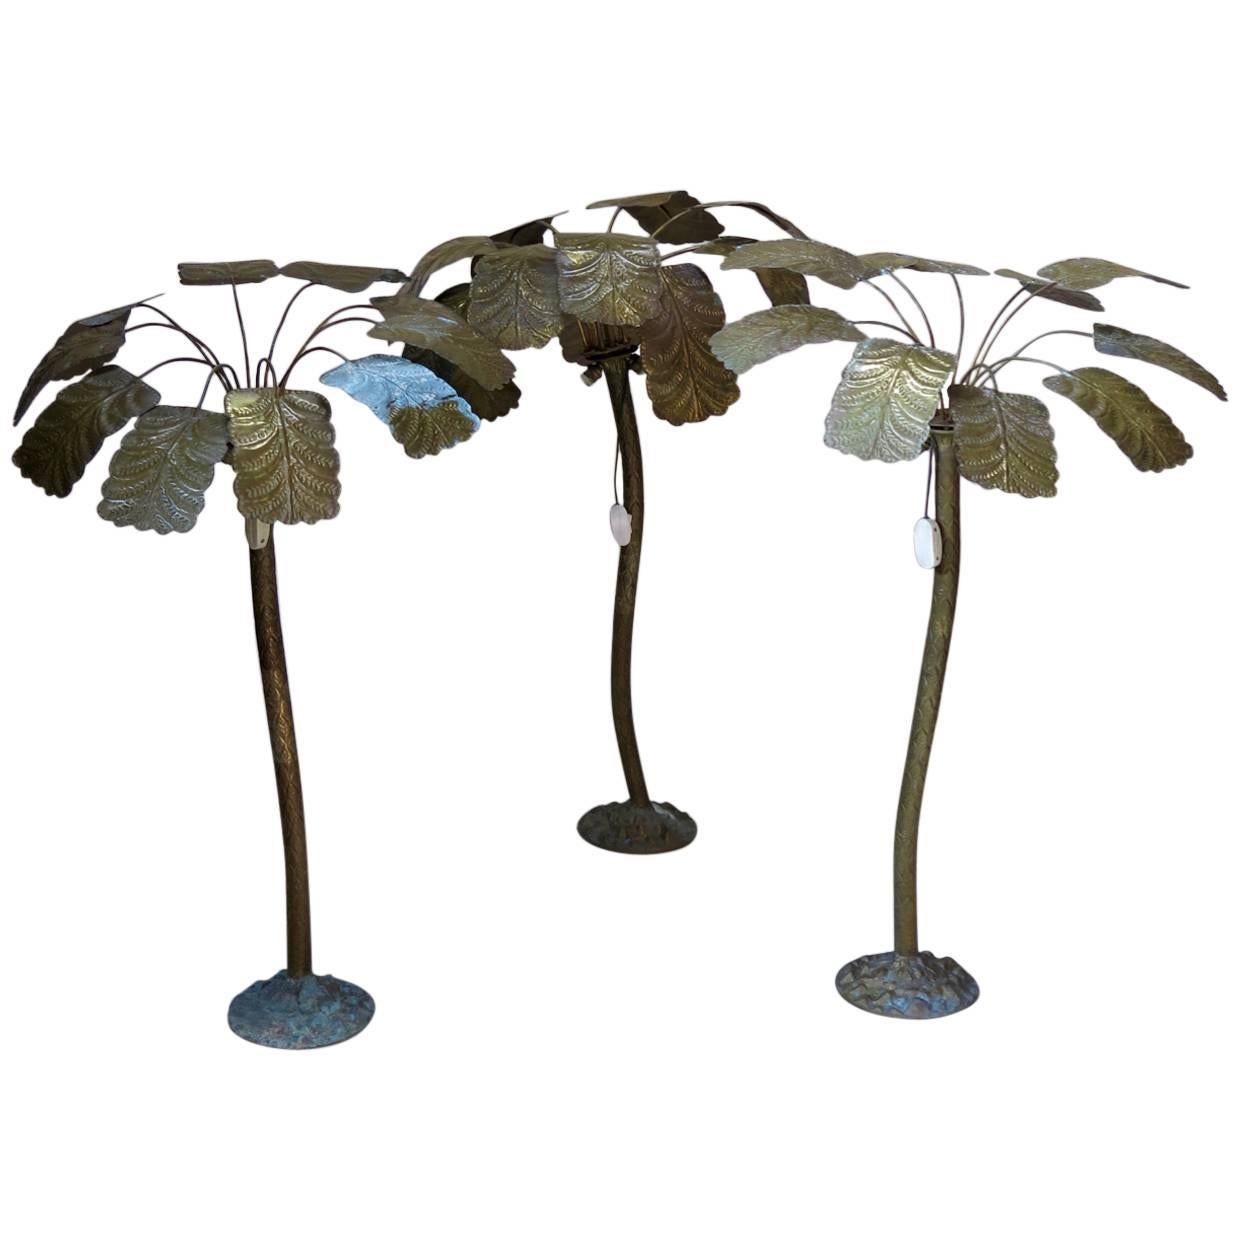 One-of-a-Kind Brass Palmtree Lamps, France, circa 1930s For Sale